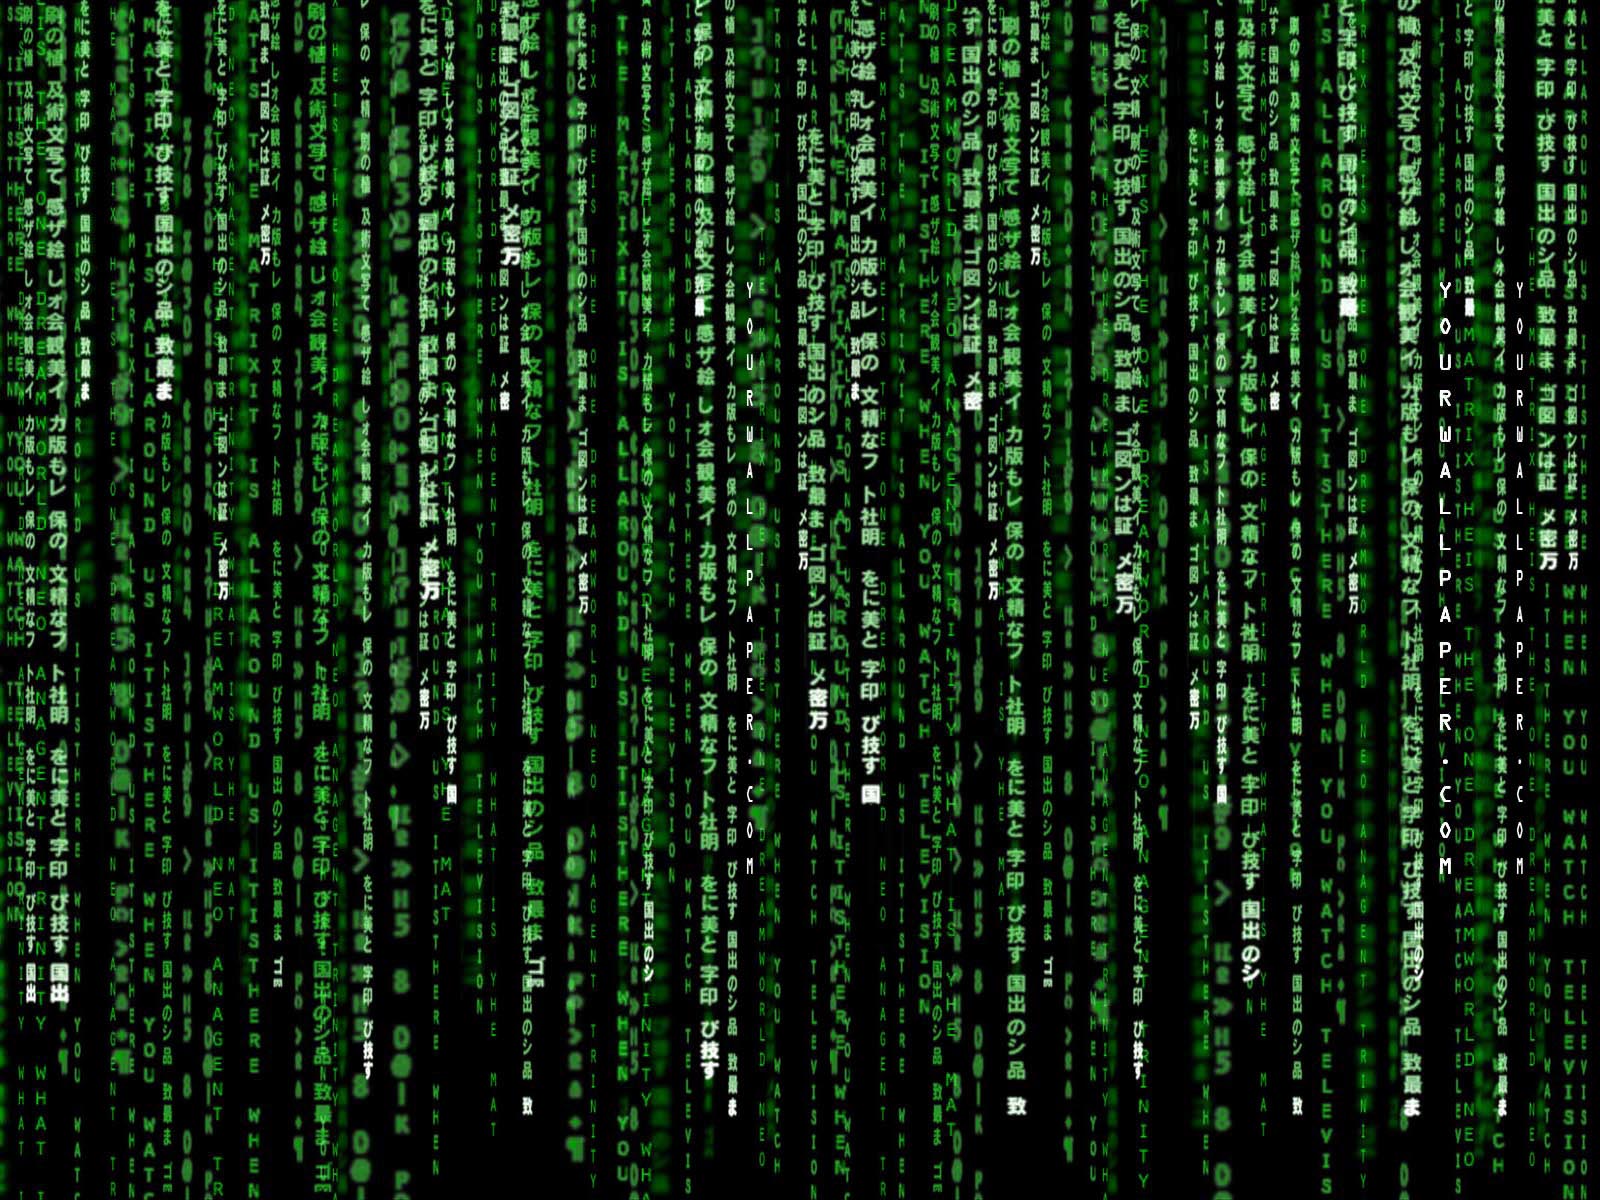 9 The Matrix Revolutions HD Wallpapers | Backgrounds - Wallpaper Abyss